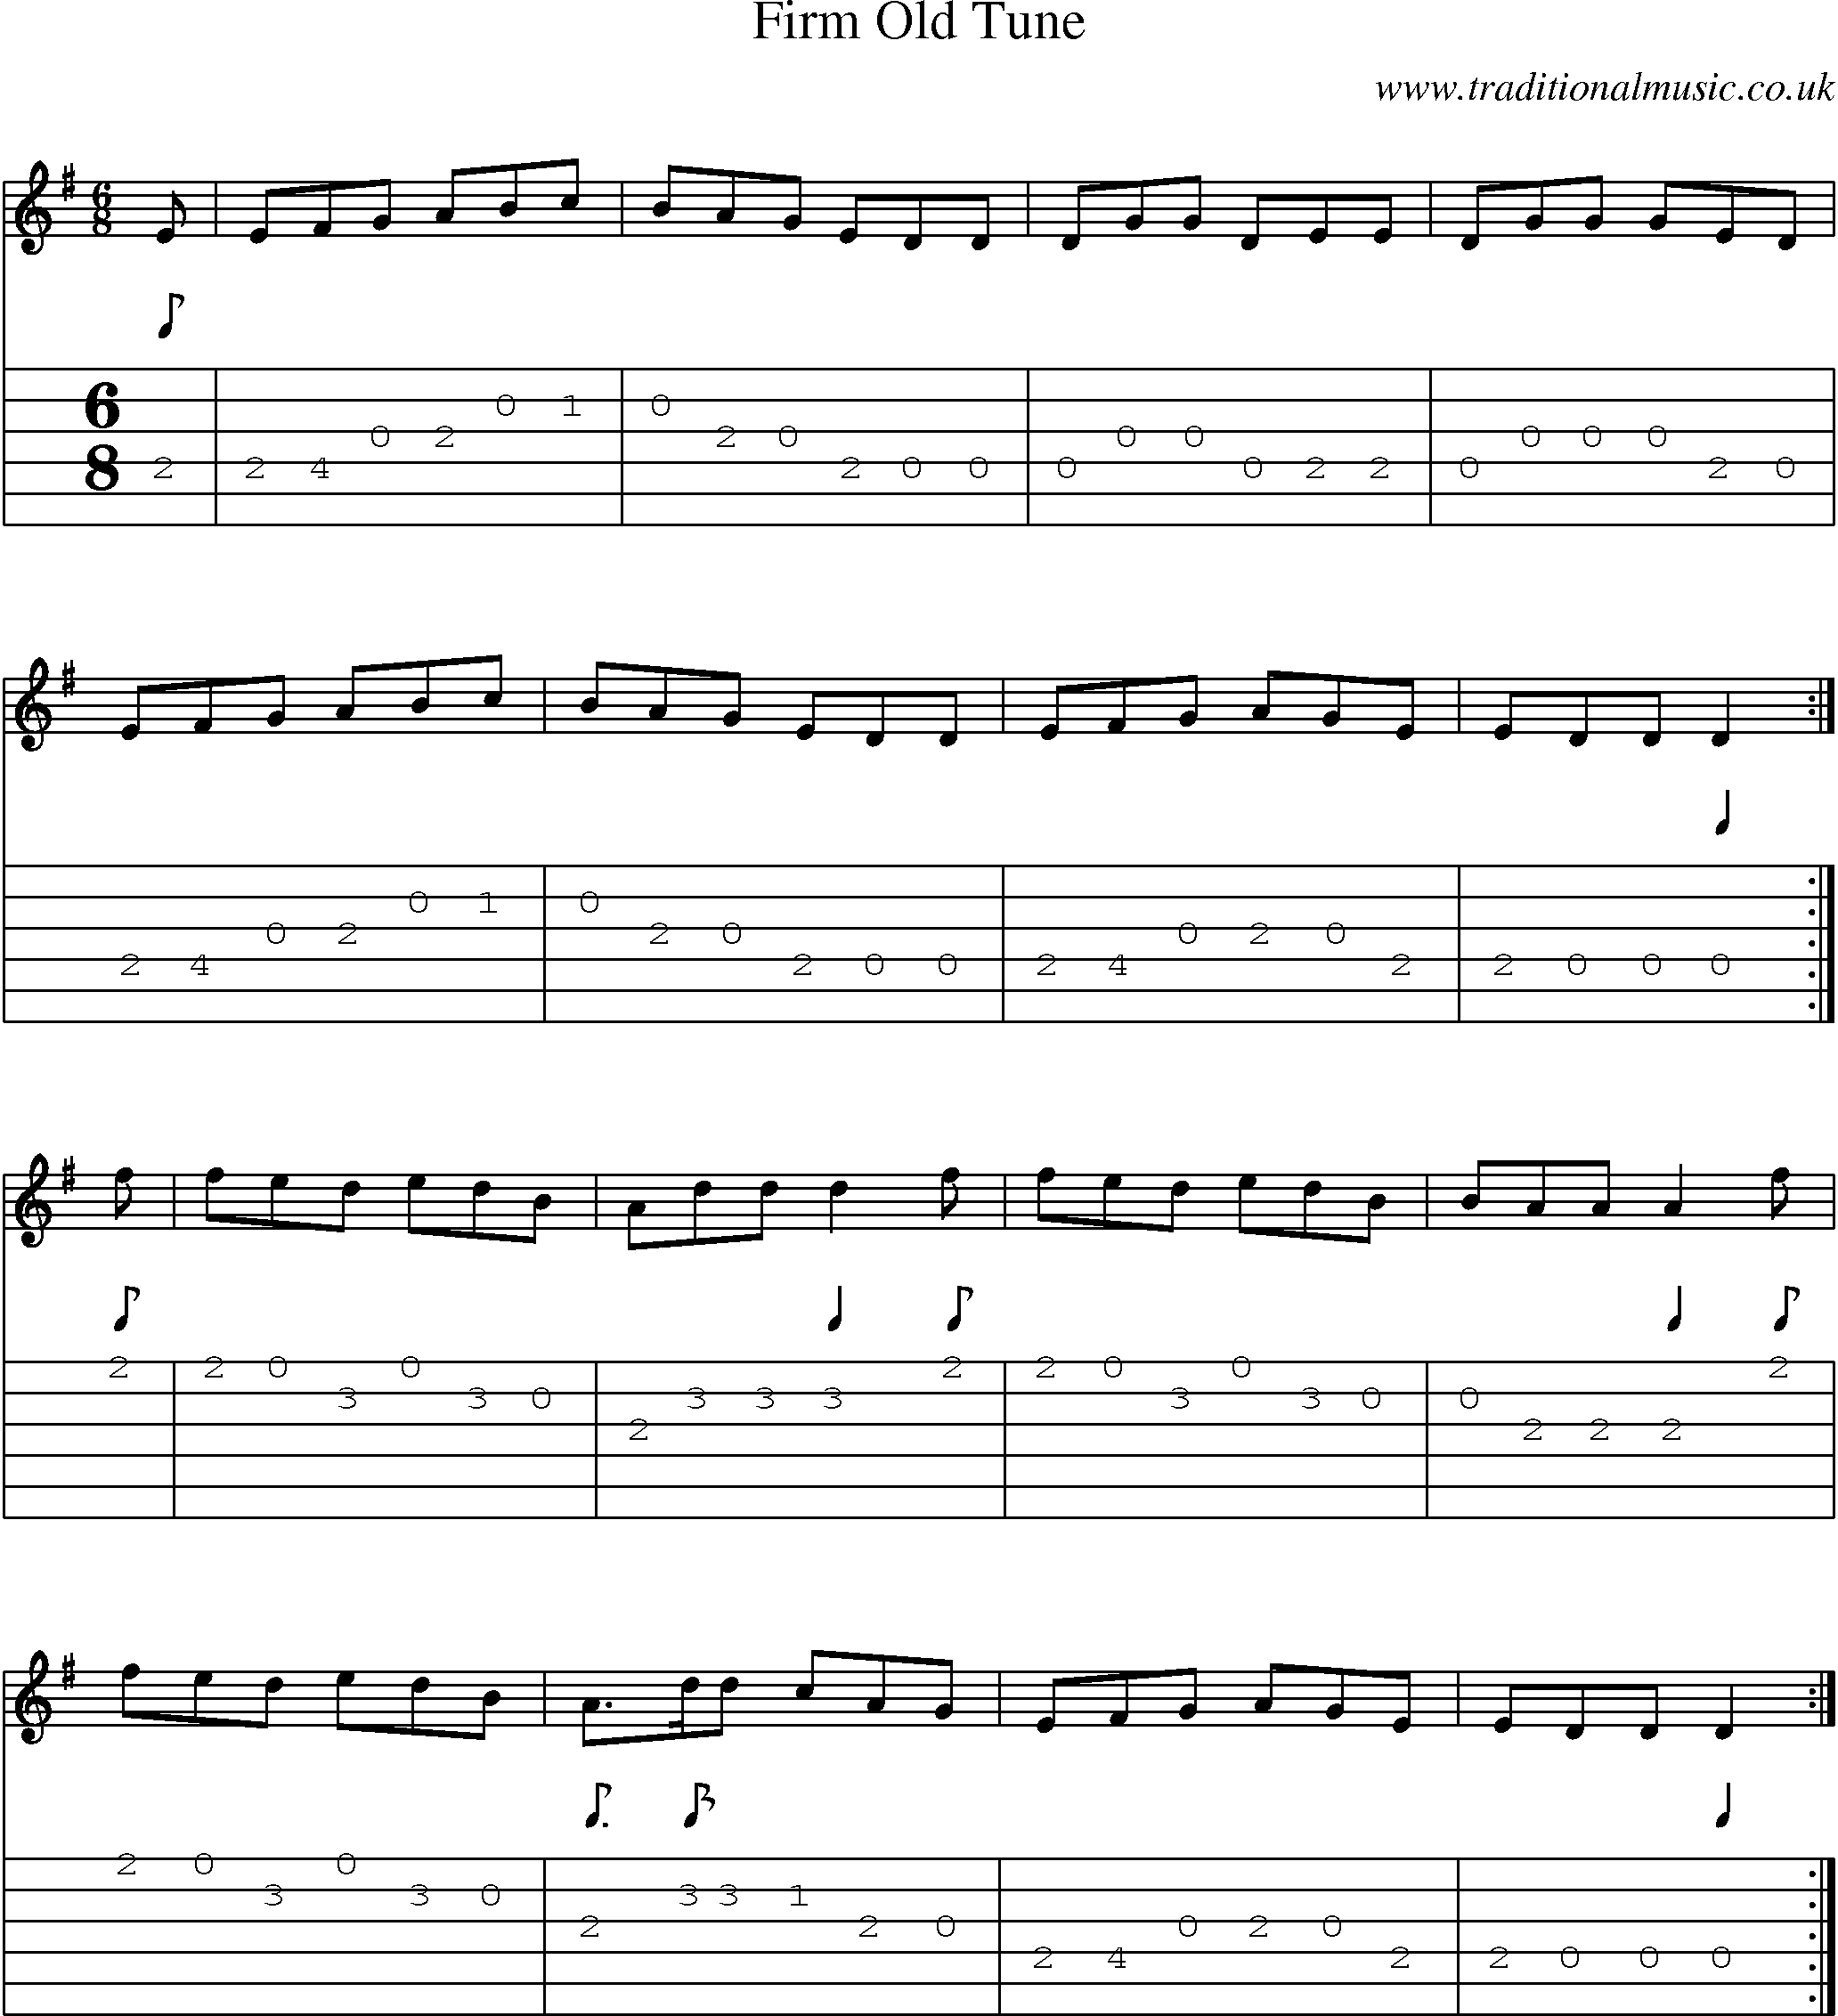 Music Score and Guitar Tabs for Firm Old Tune